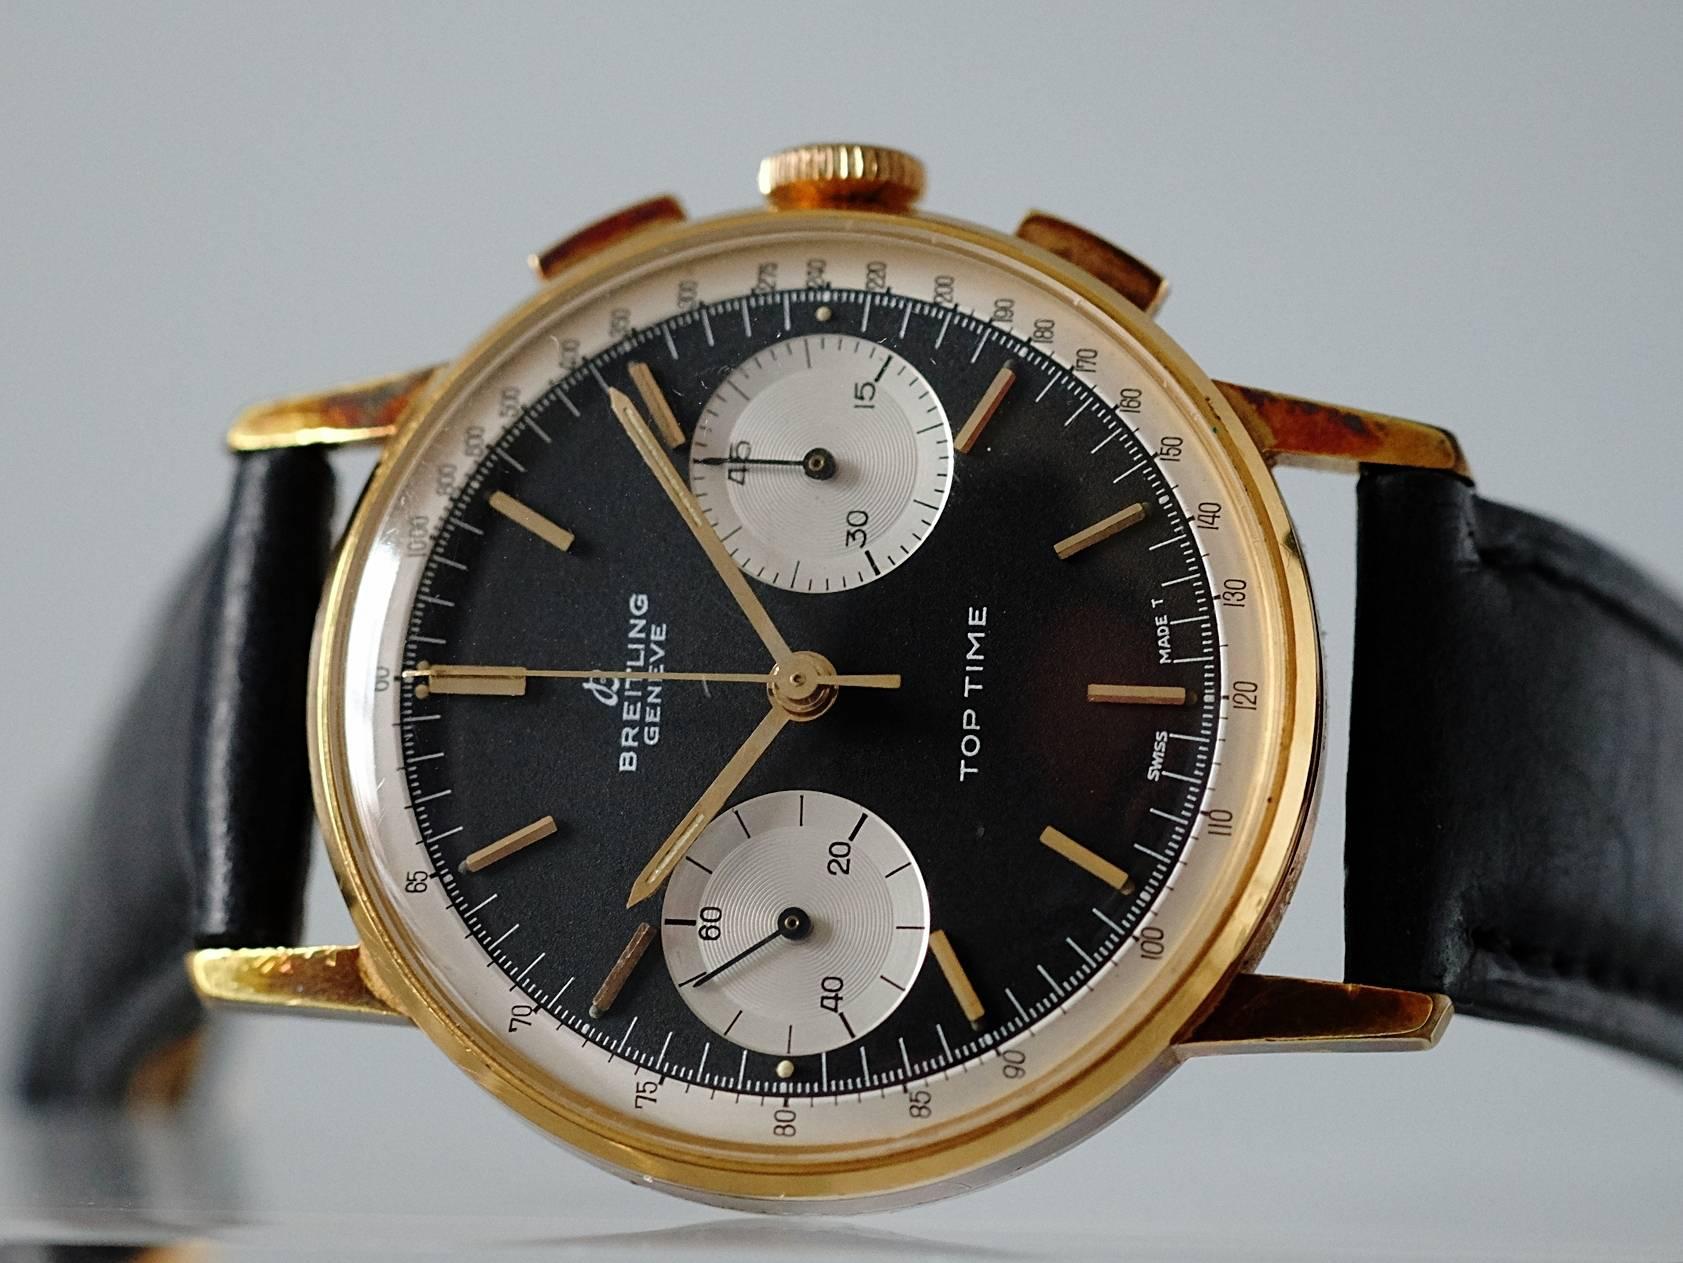 One of the lesser-known models produced by Breitling, the Top Time was introduced in the 1960’s and was available in a wide variety of styles and many different dial and case combinations. It was Breitling's answer to the newly introduced Rolex